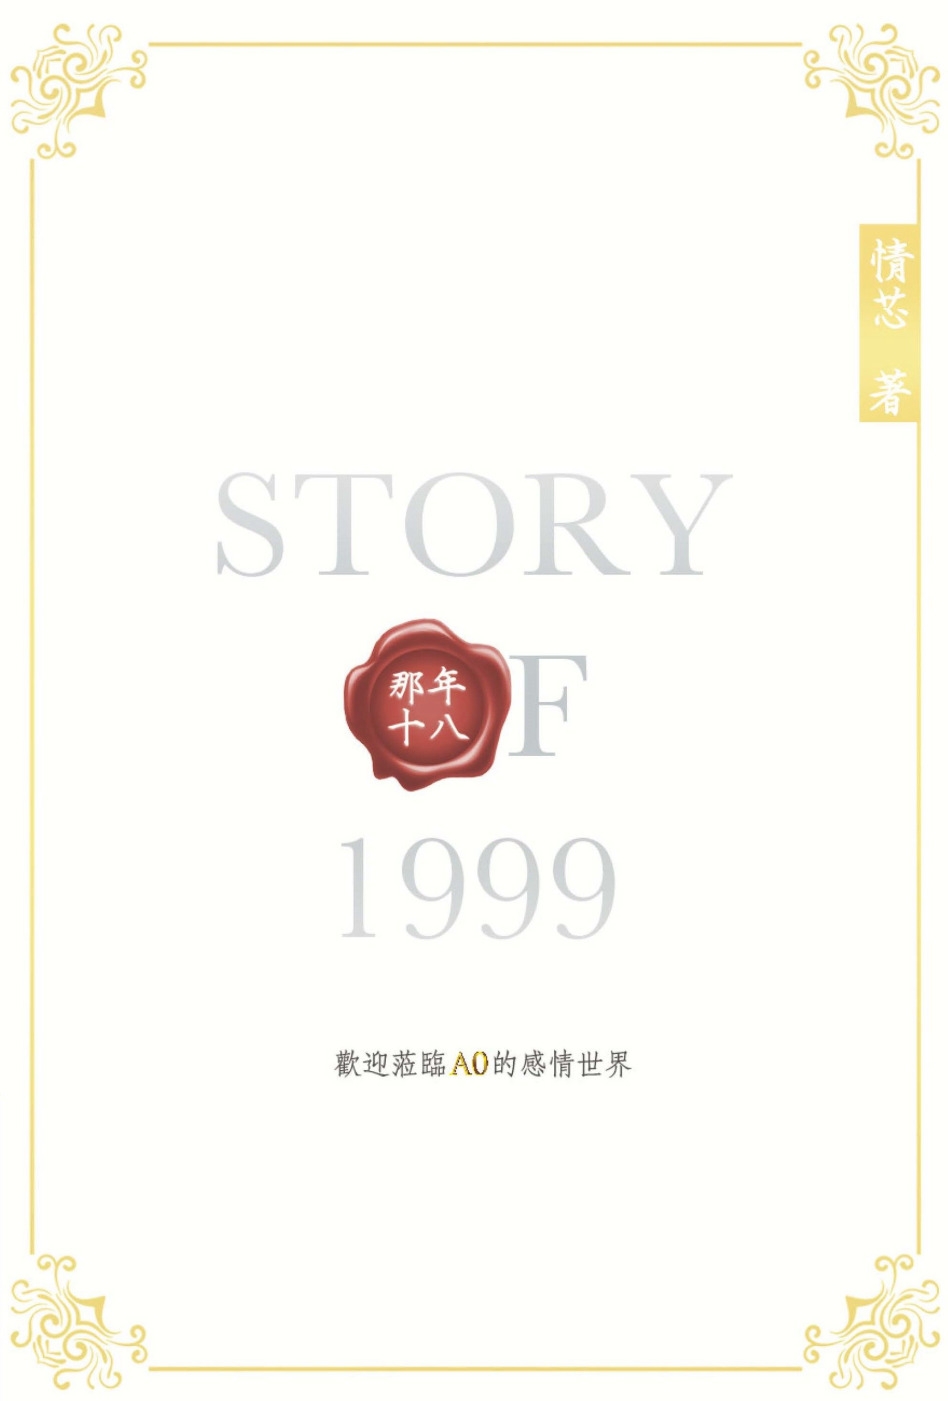 Story of 1999 那年...